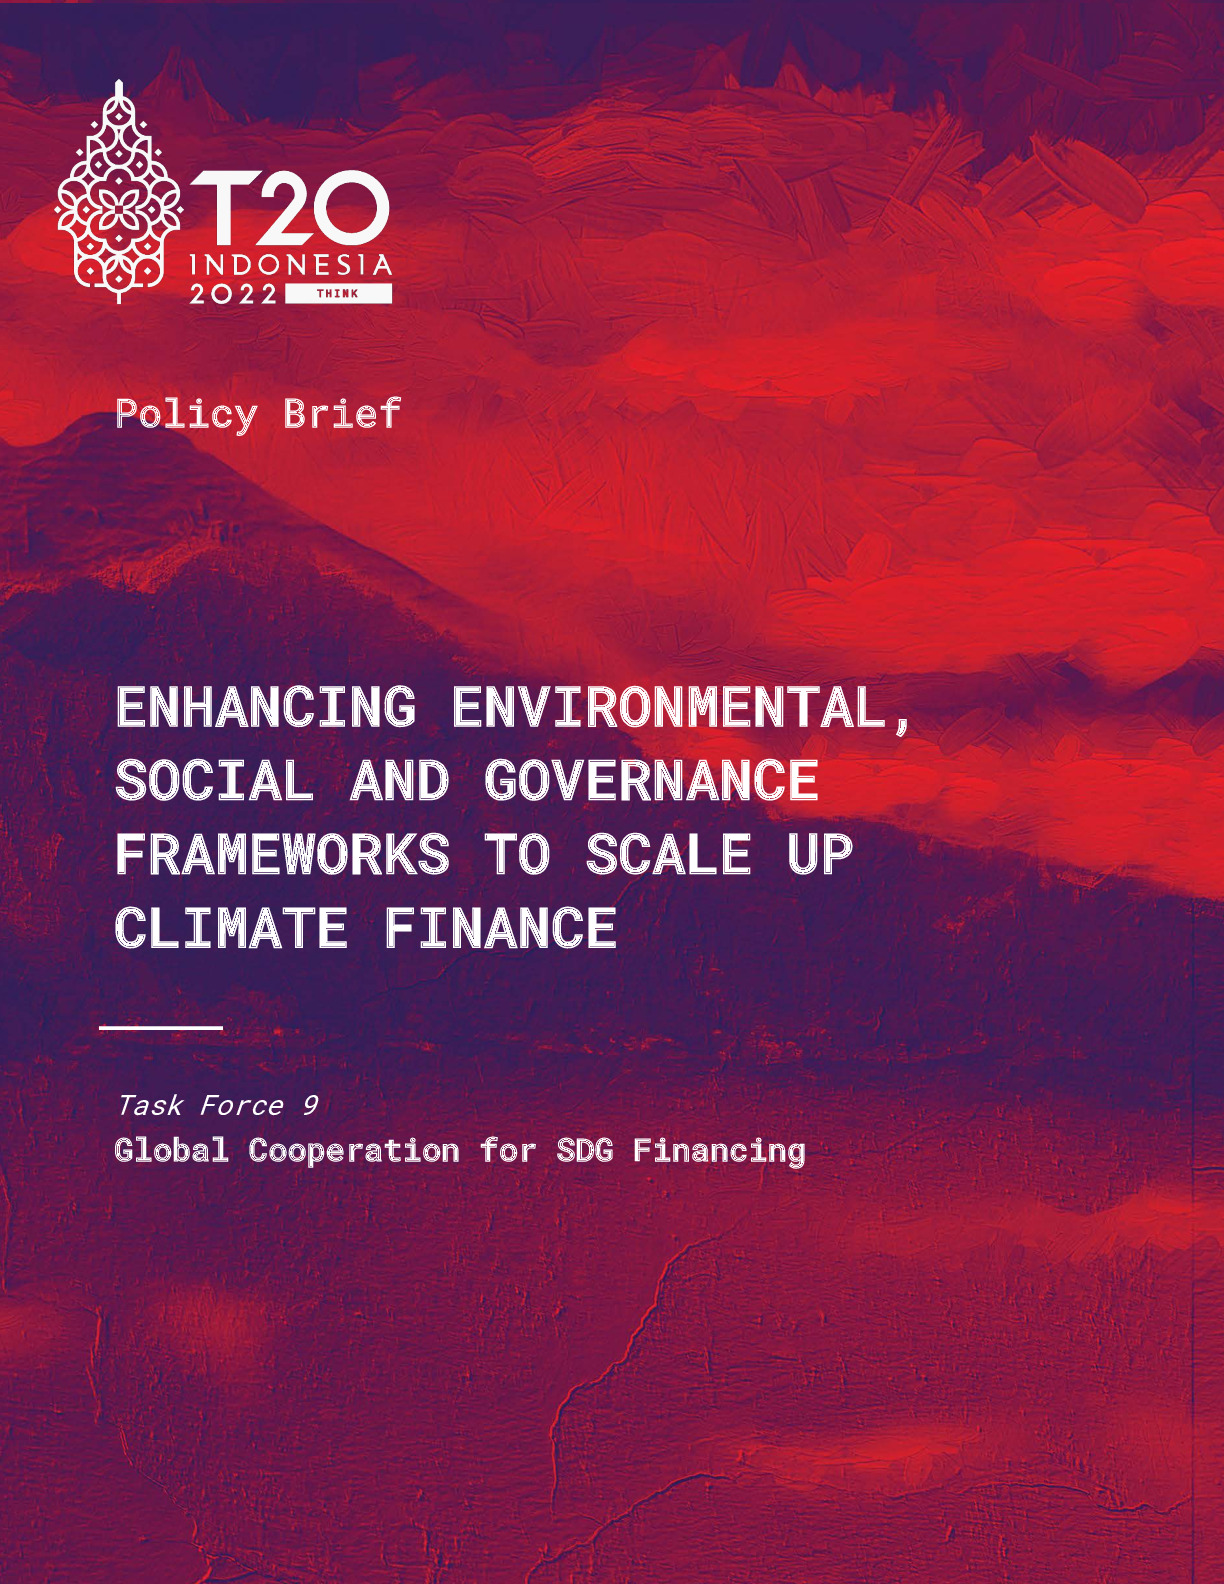 Enhancing Environmental, Social and Governance Frameworks To Scale Up Climate Finance